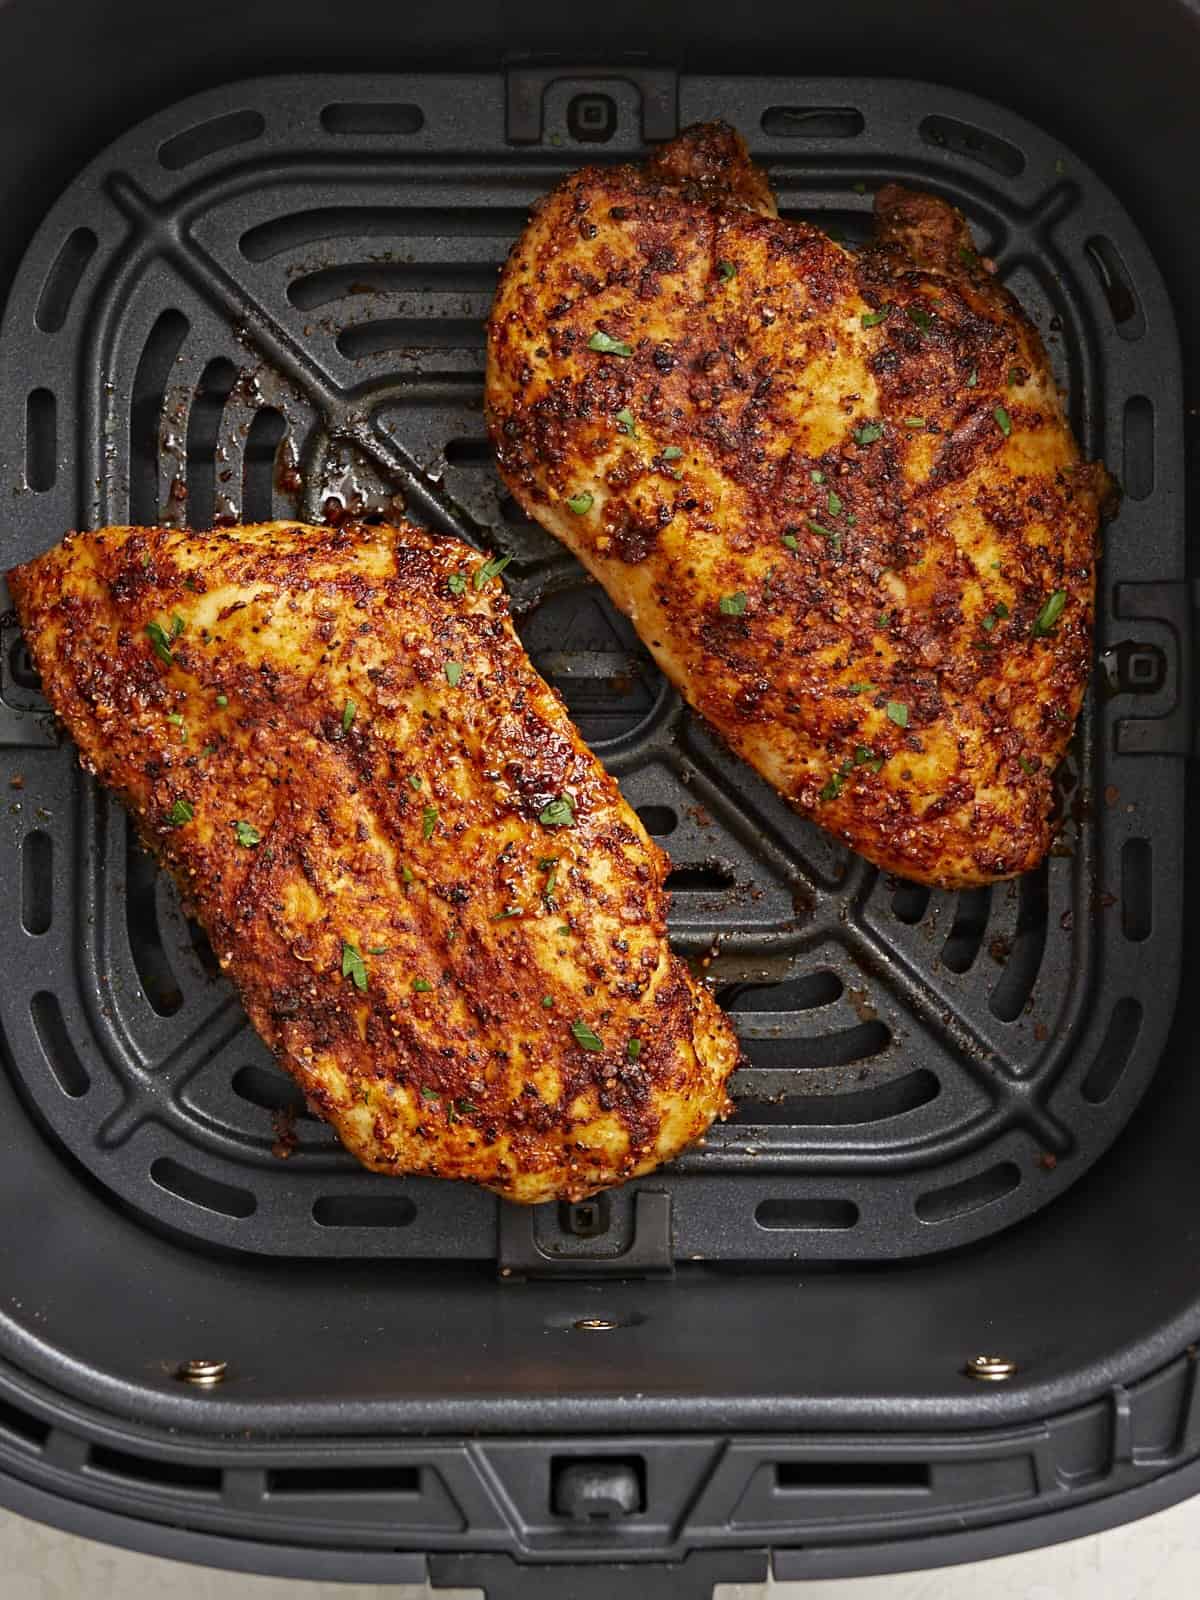 Cooked overhead view of Air Fryer Chicken Breasts in an air fryer basket.